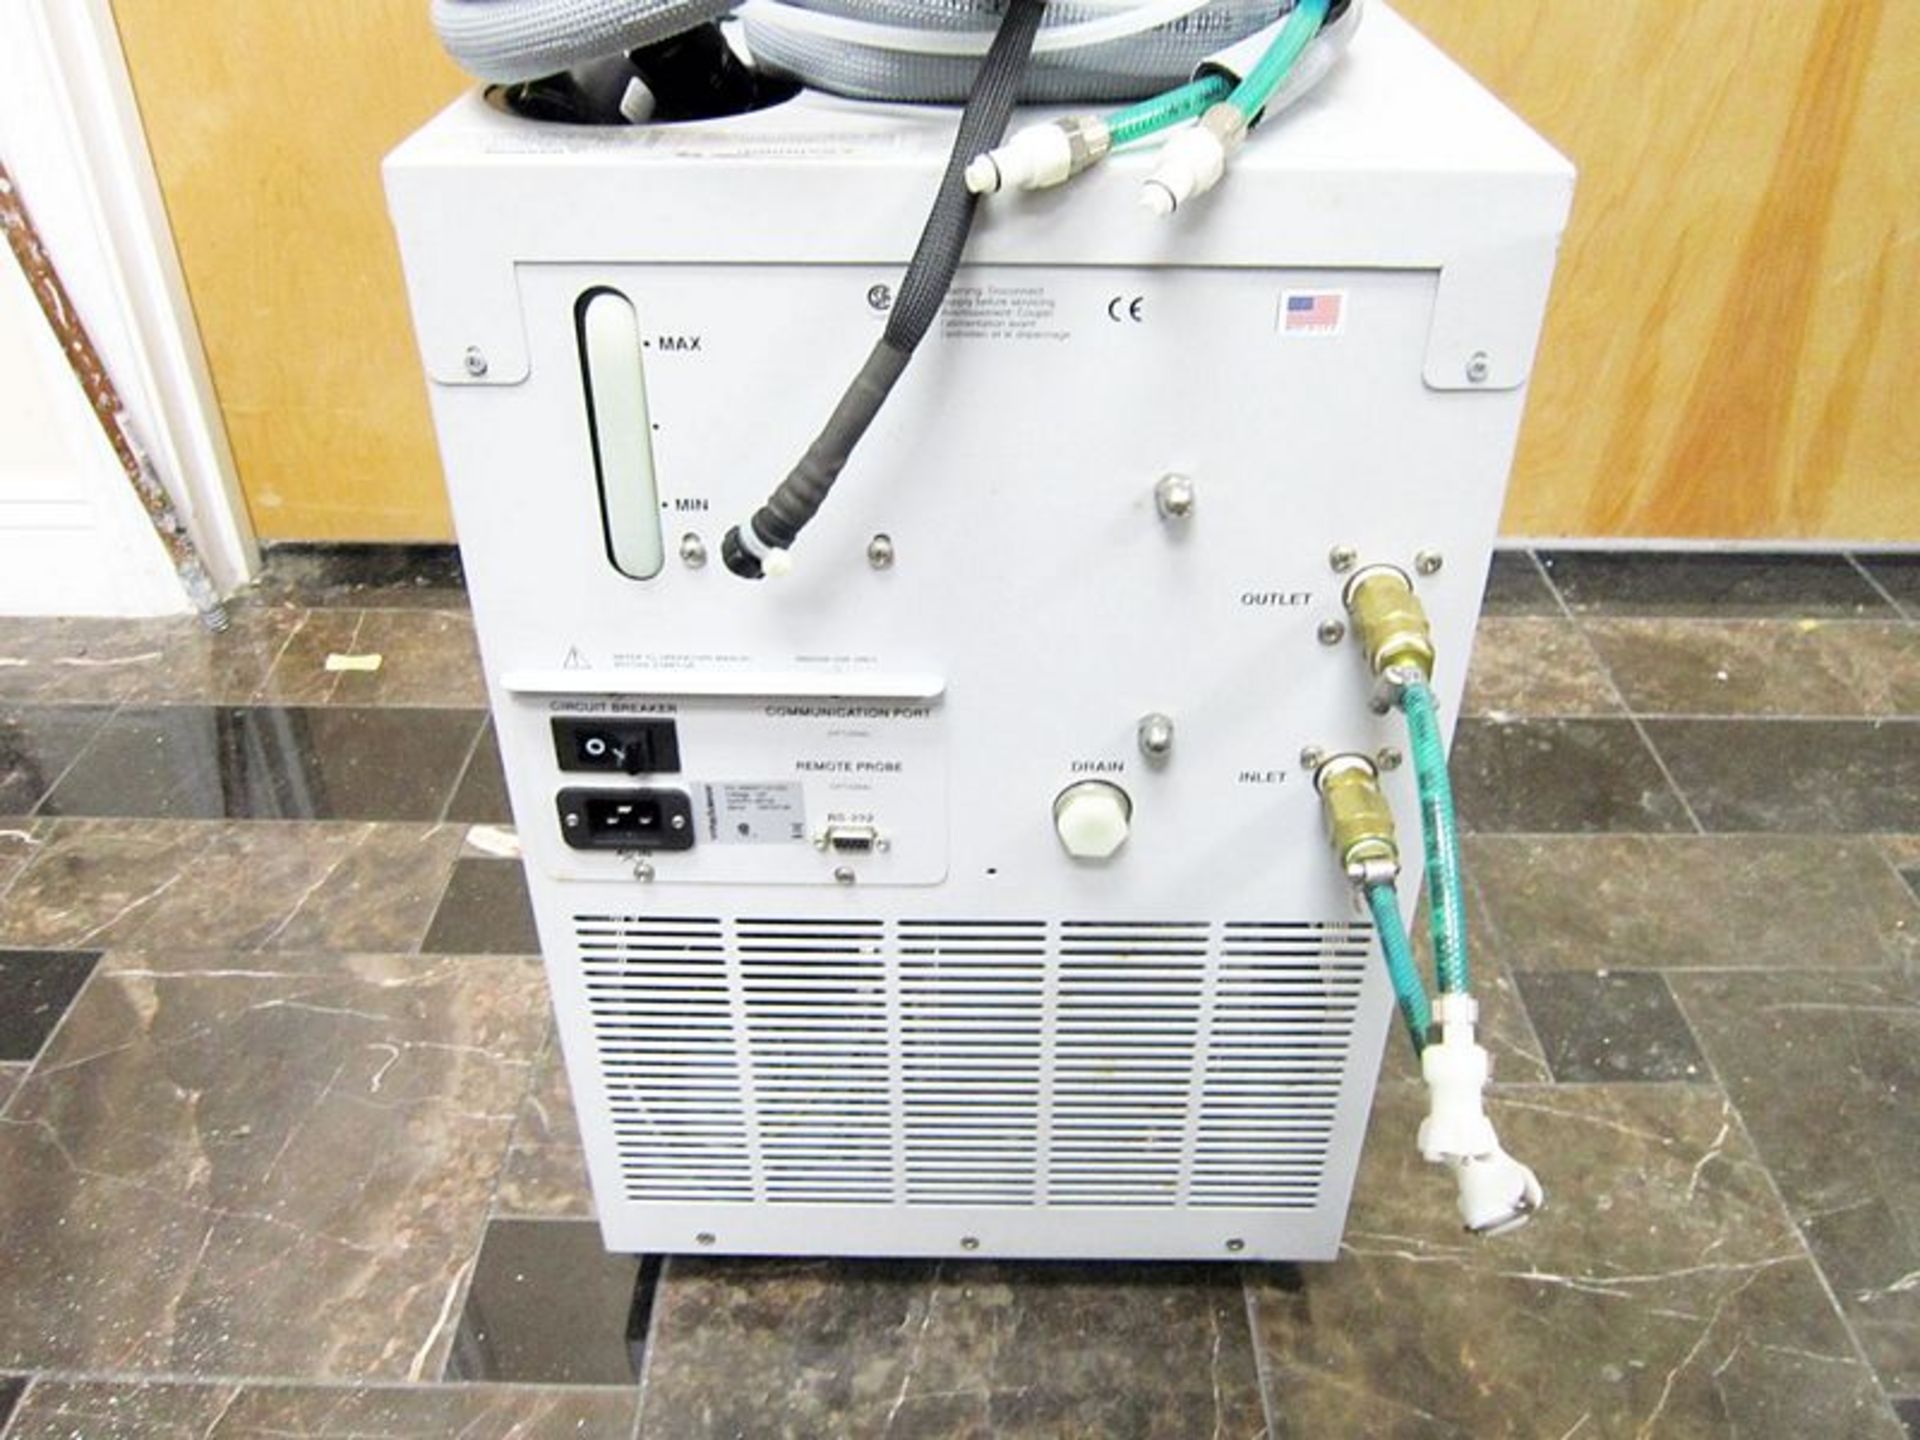 Polyscience 6560P Refrigerated Spot Chiller with Protos Chip Holders 6560P11A123C - Image 7 of 8